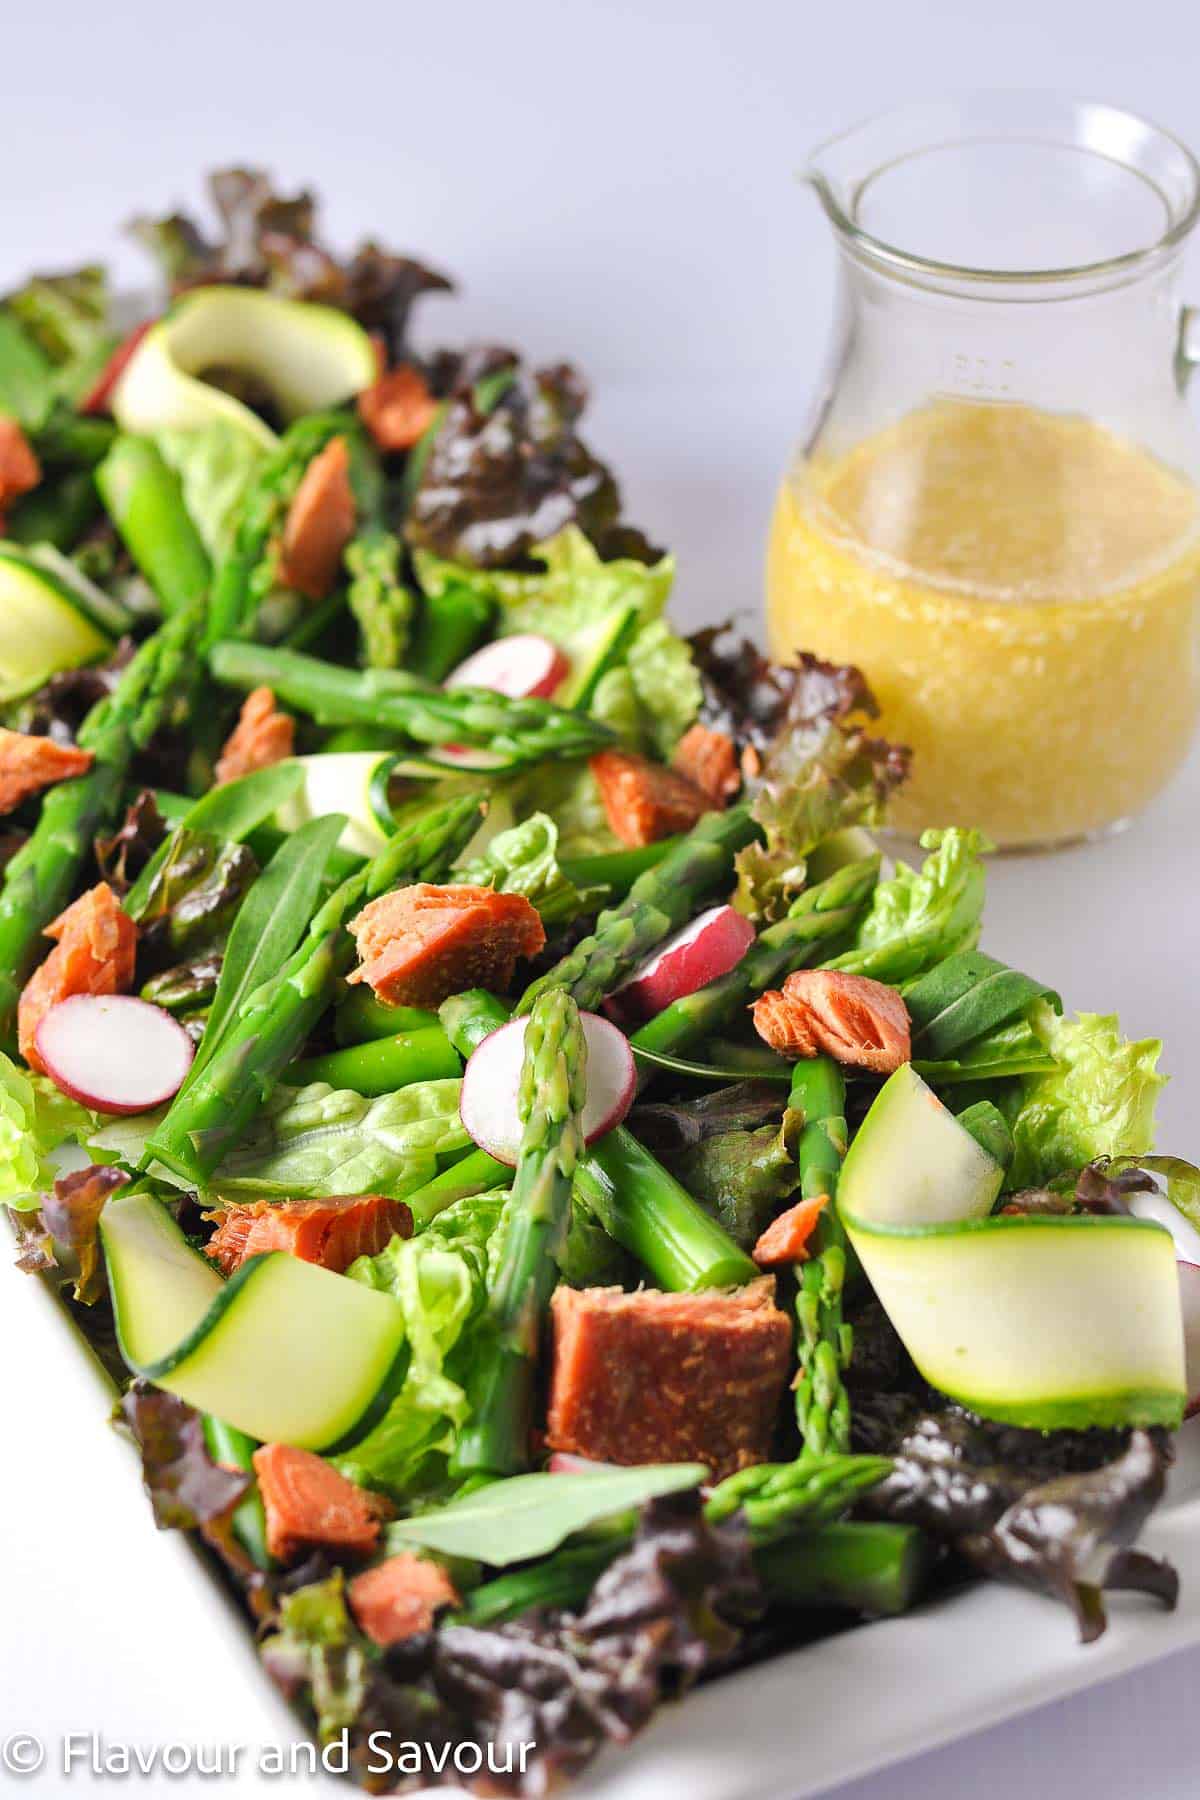 A rectangular platter with smoked salmon salad with asparagus, zucchini ribbons, radishes on a bed of fresh greens.